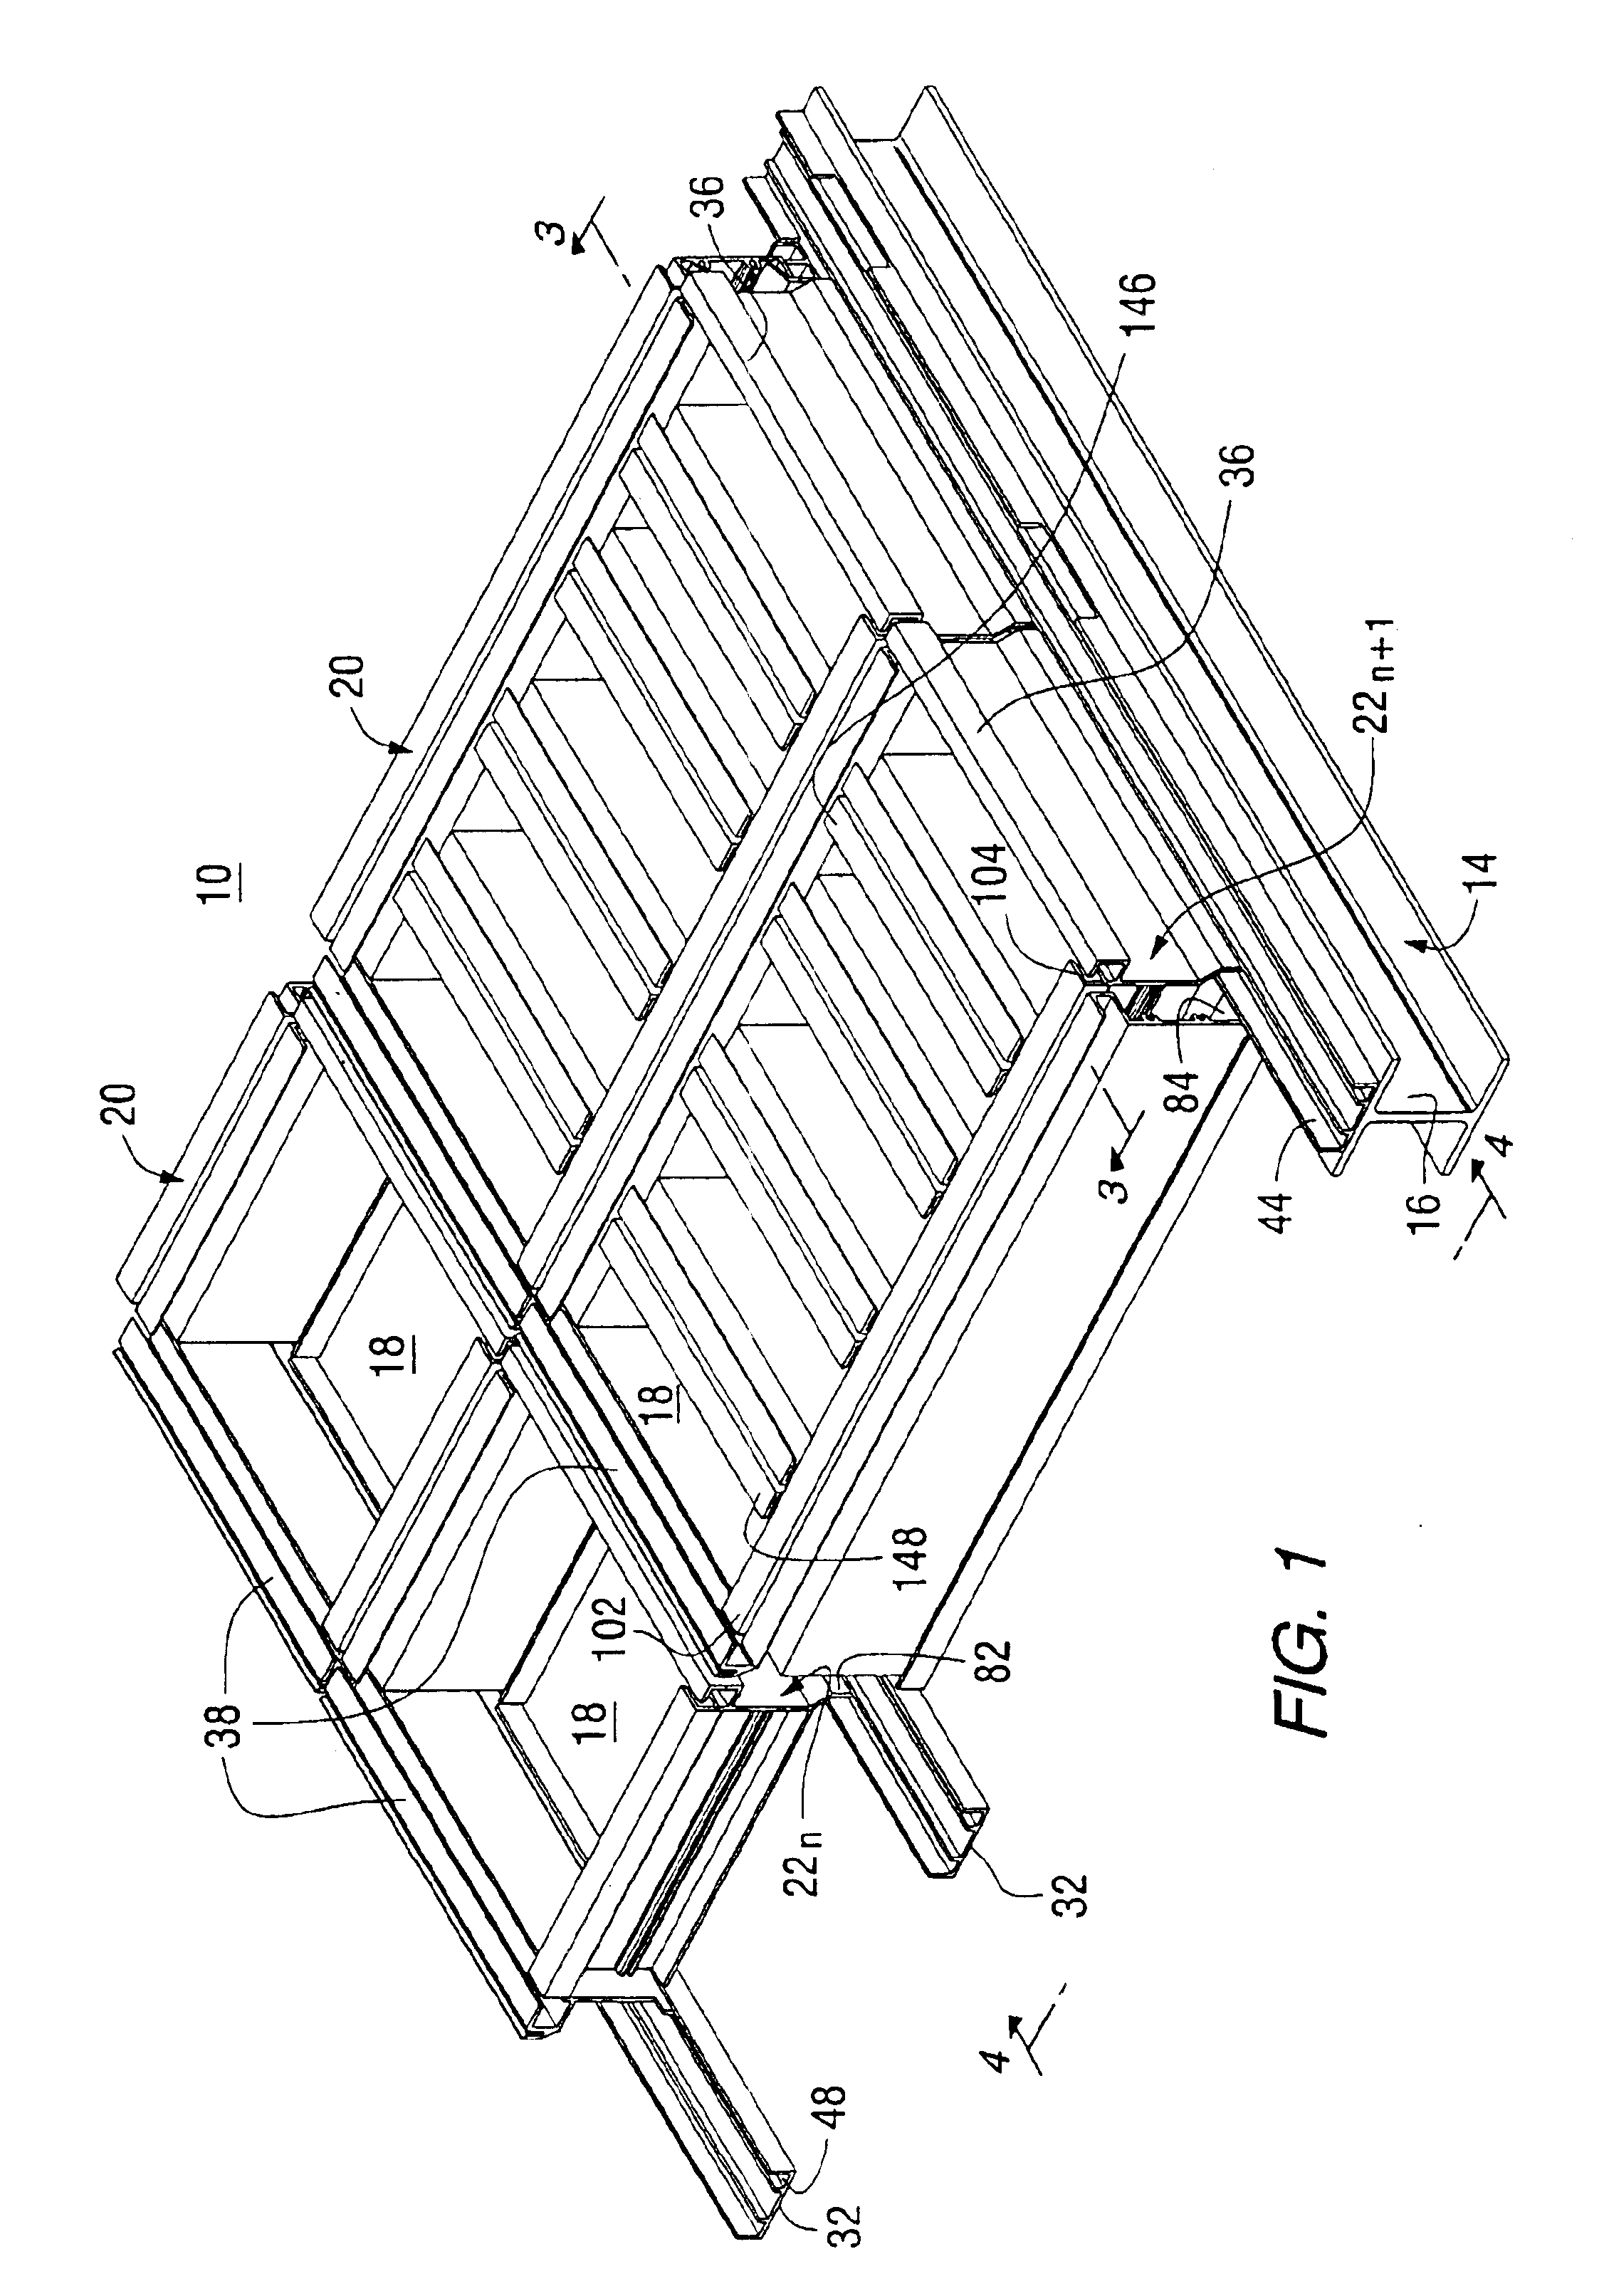 Modular system for securing flat panels to a curved support structure